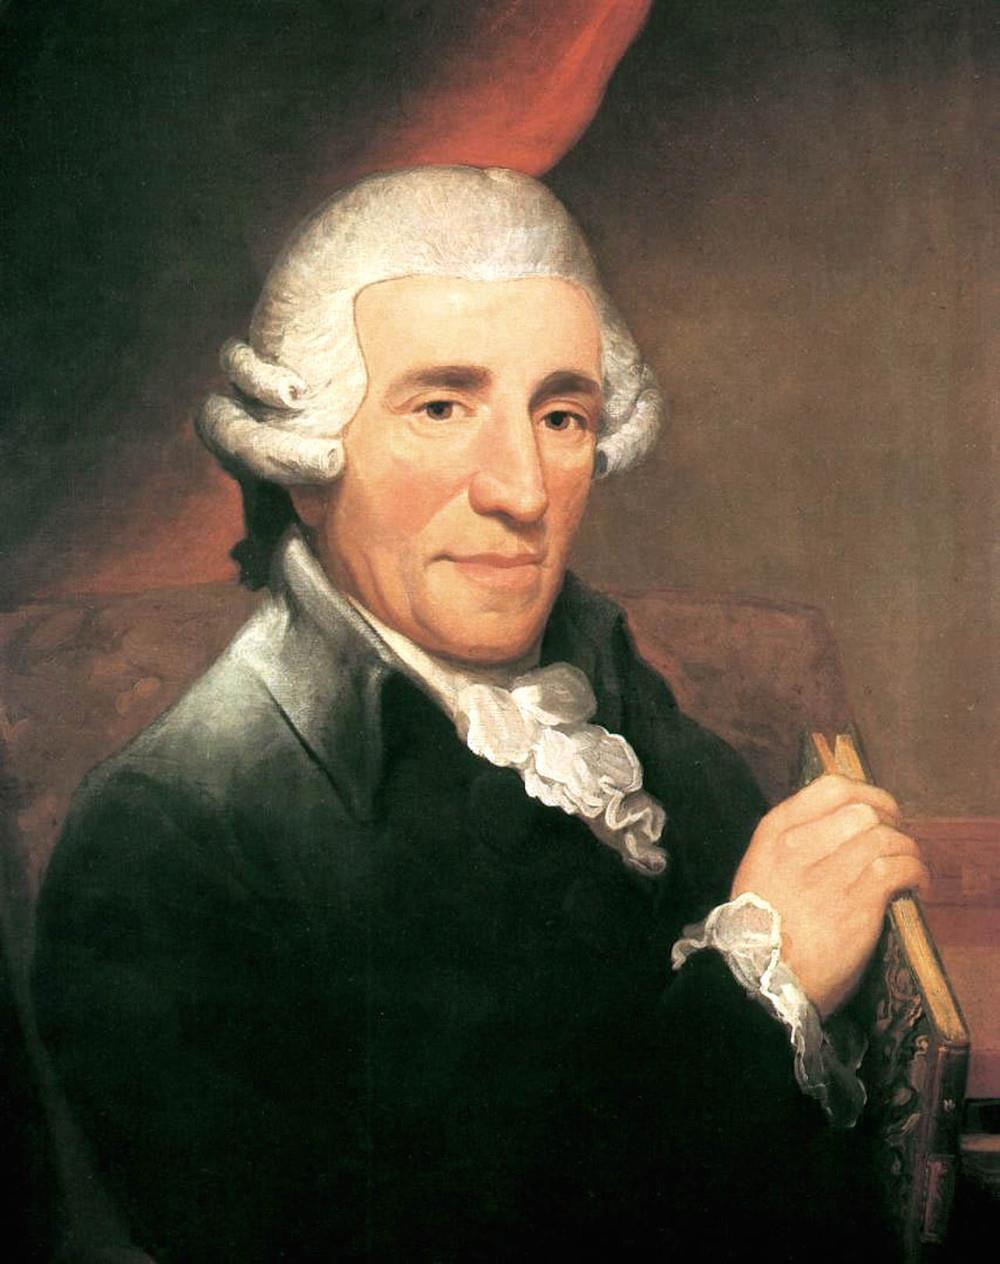 Franz Joseph Haydn When Napoleon invaded Vienna, he respected the composer so much, he put 2 sentries to guard a frail Haydn so he wouldn t be harmed.